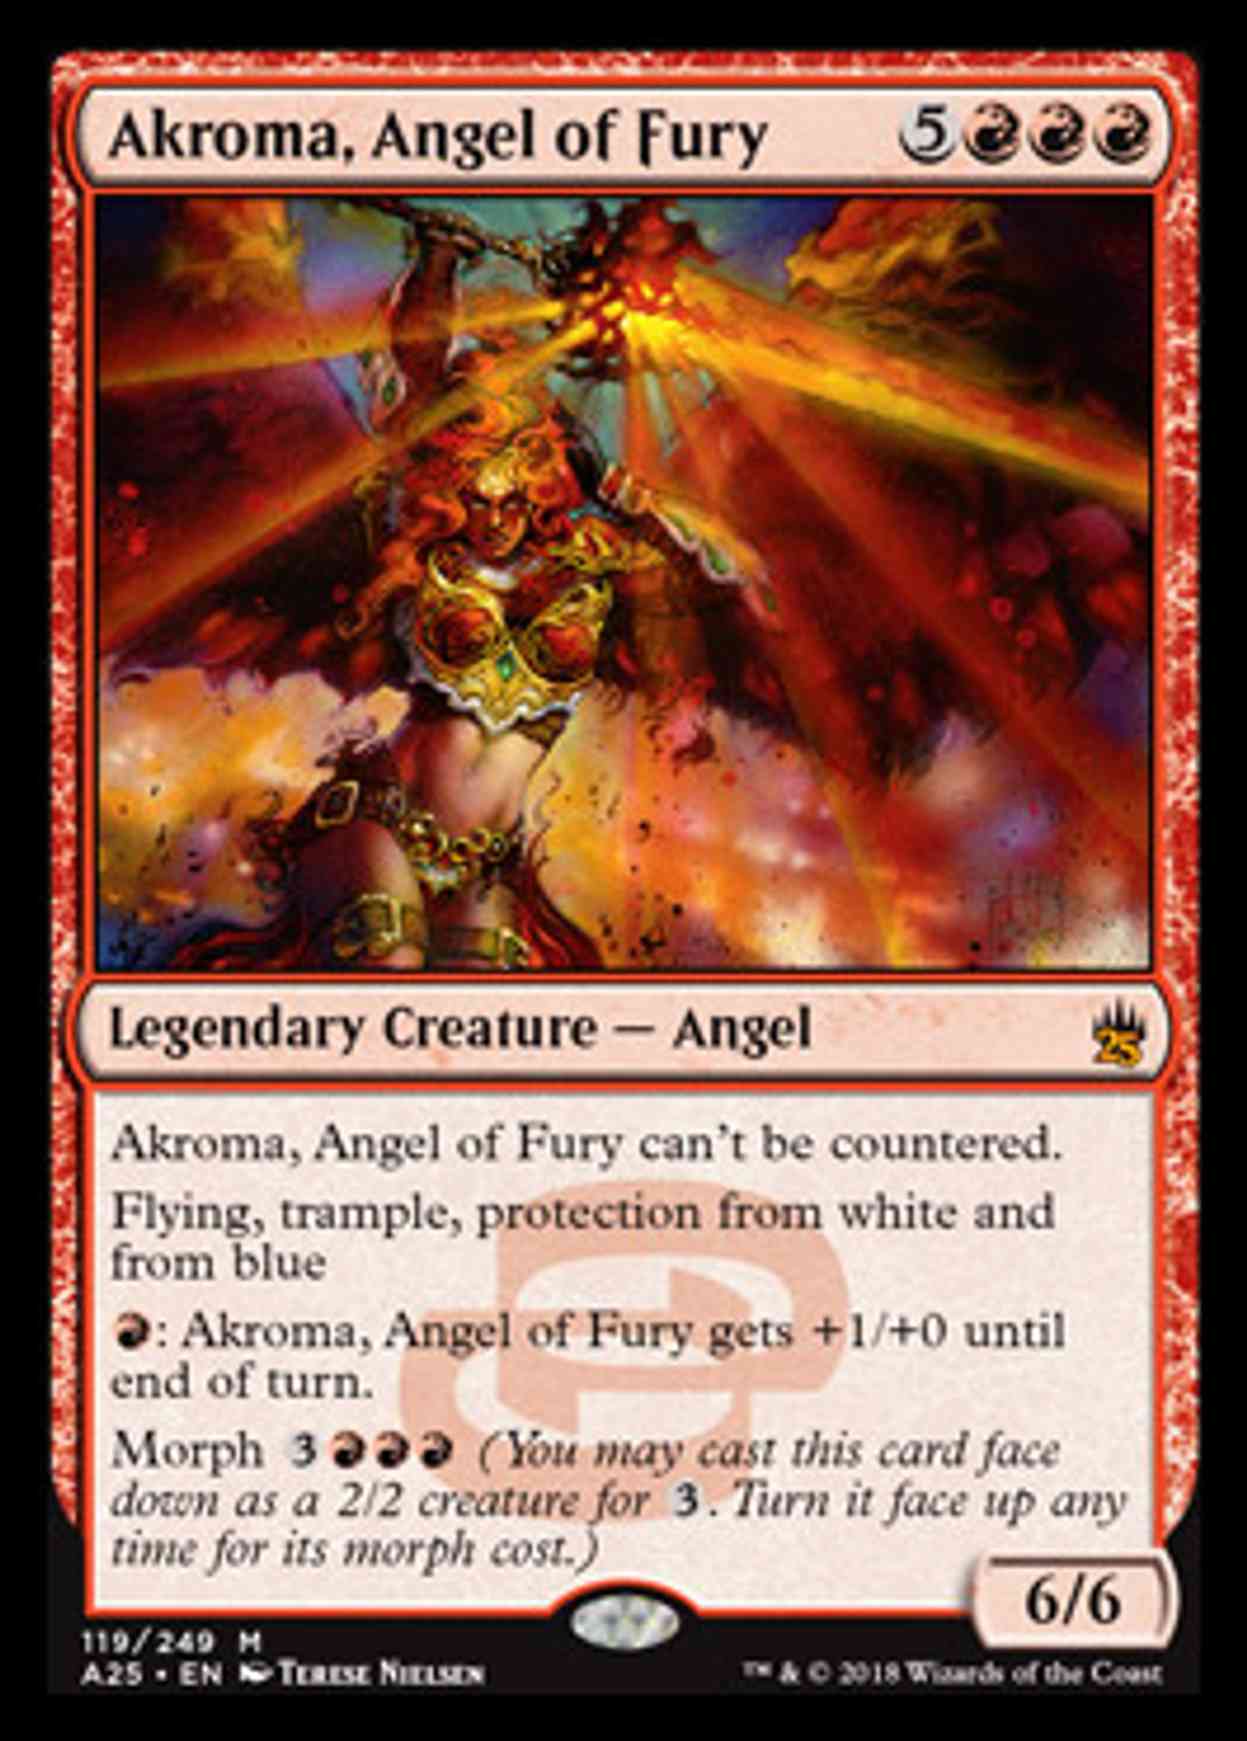 Akroma, Angel of Fury magic card front